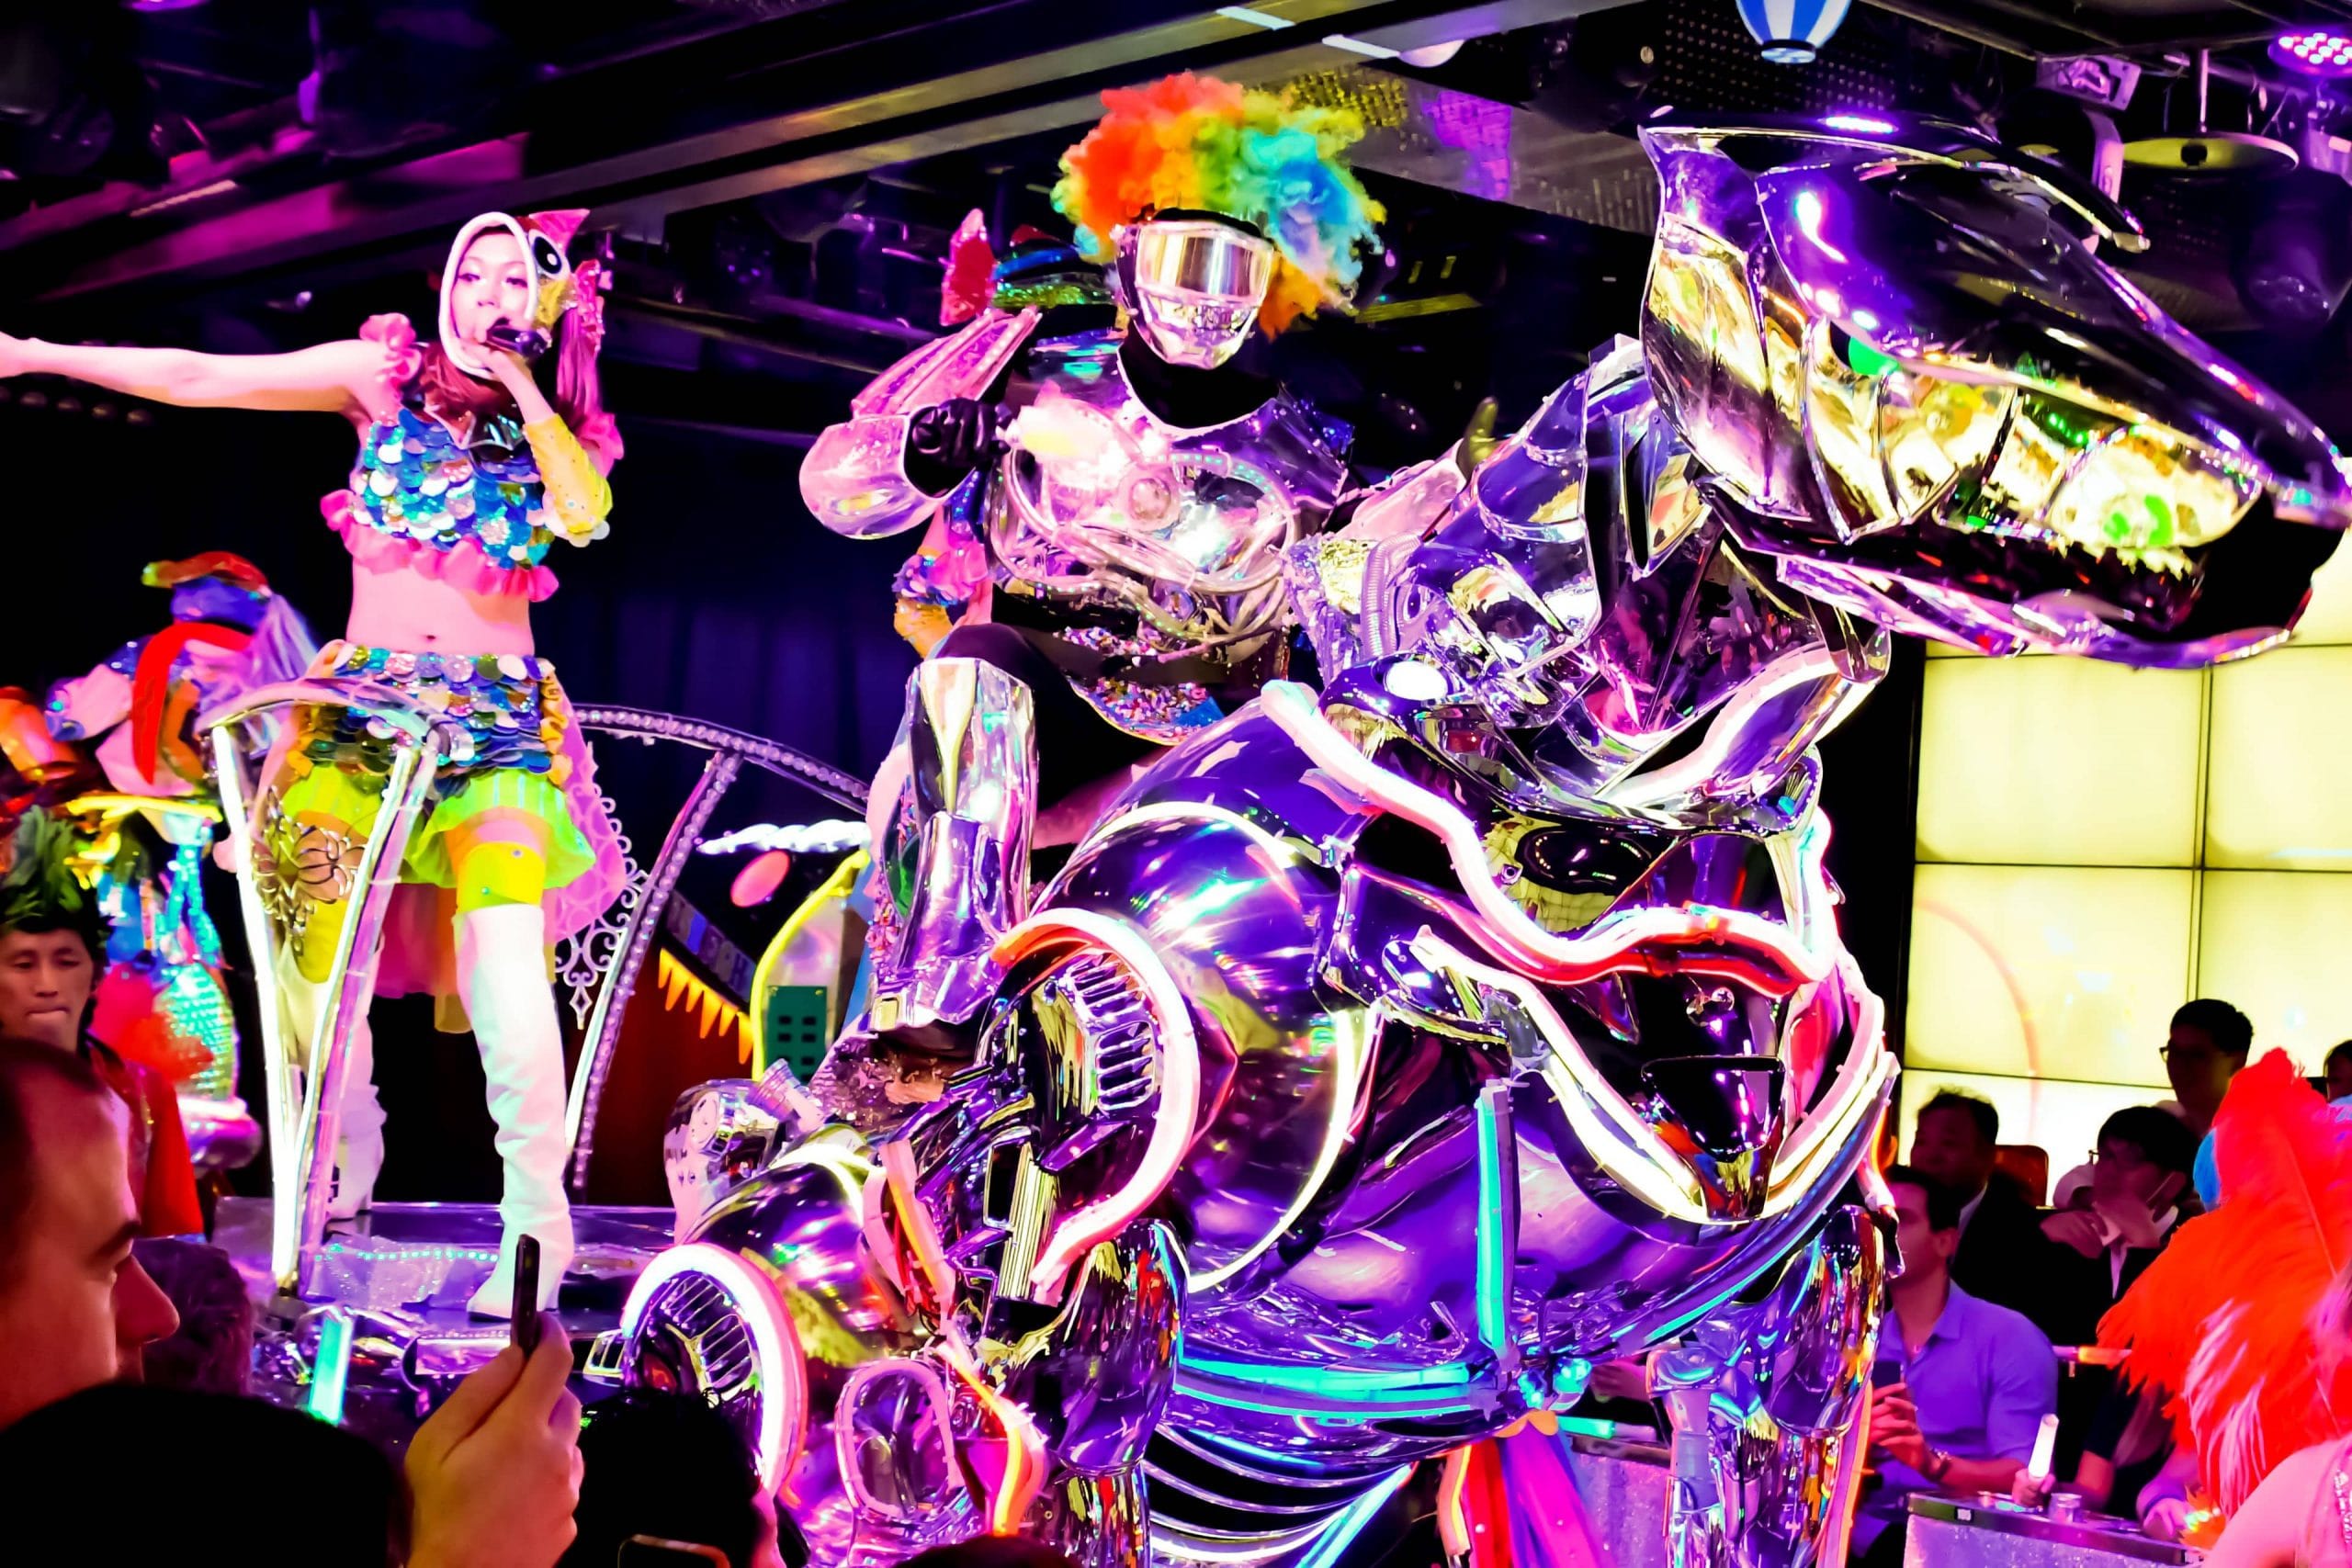 Rainbow-haired robot riding a chrome dinosaur at the Robot Restaurant Show in Tokyo